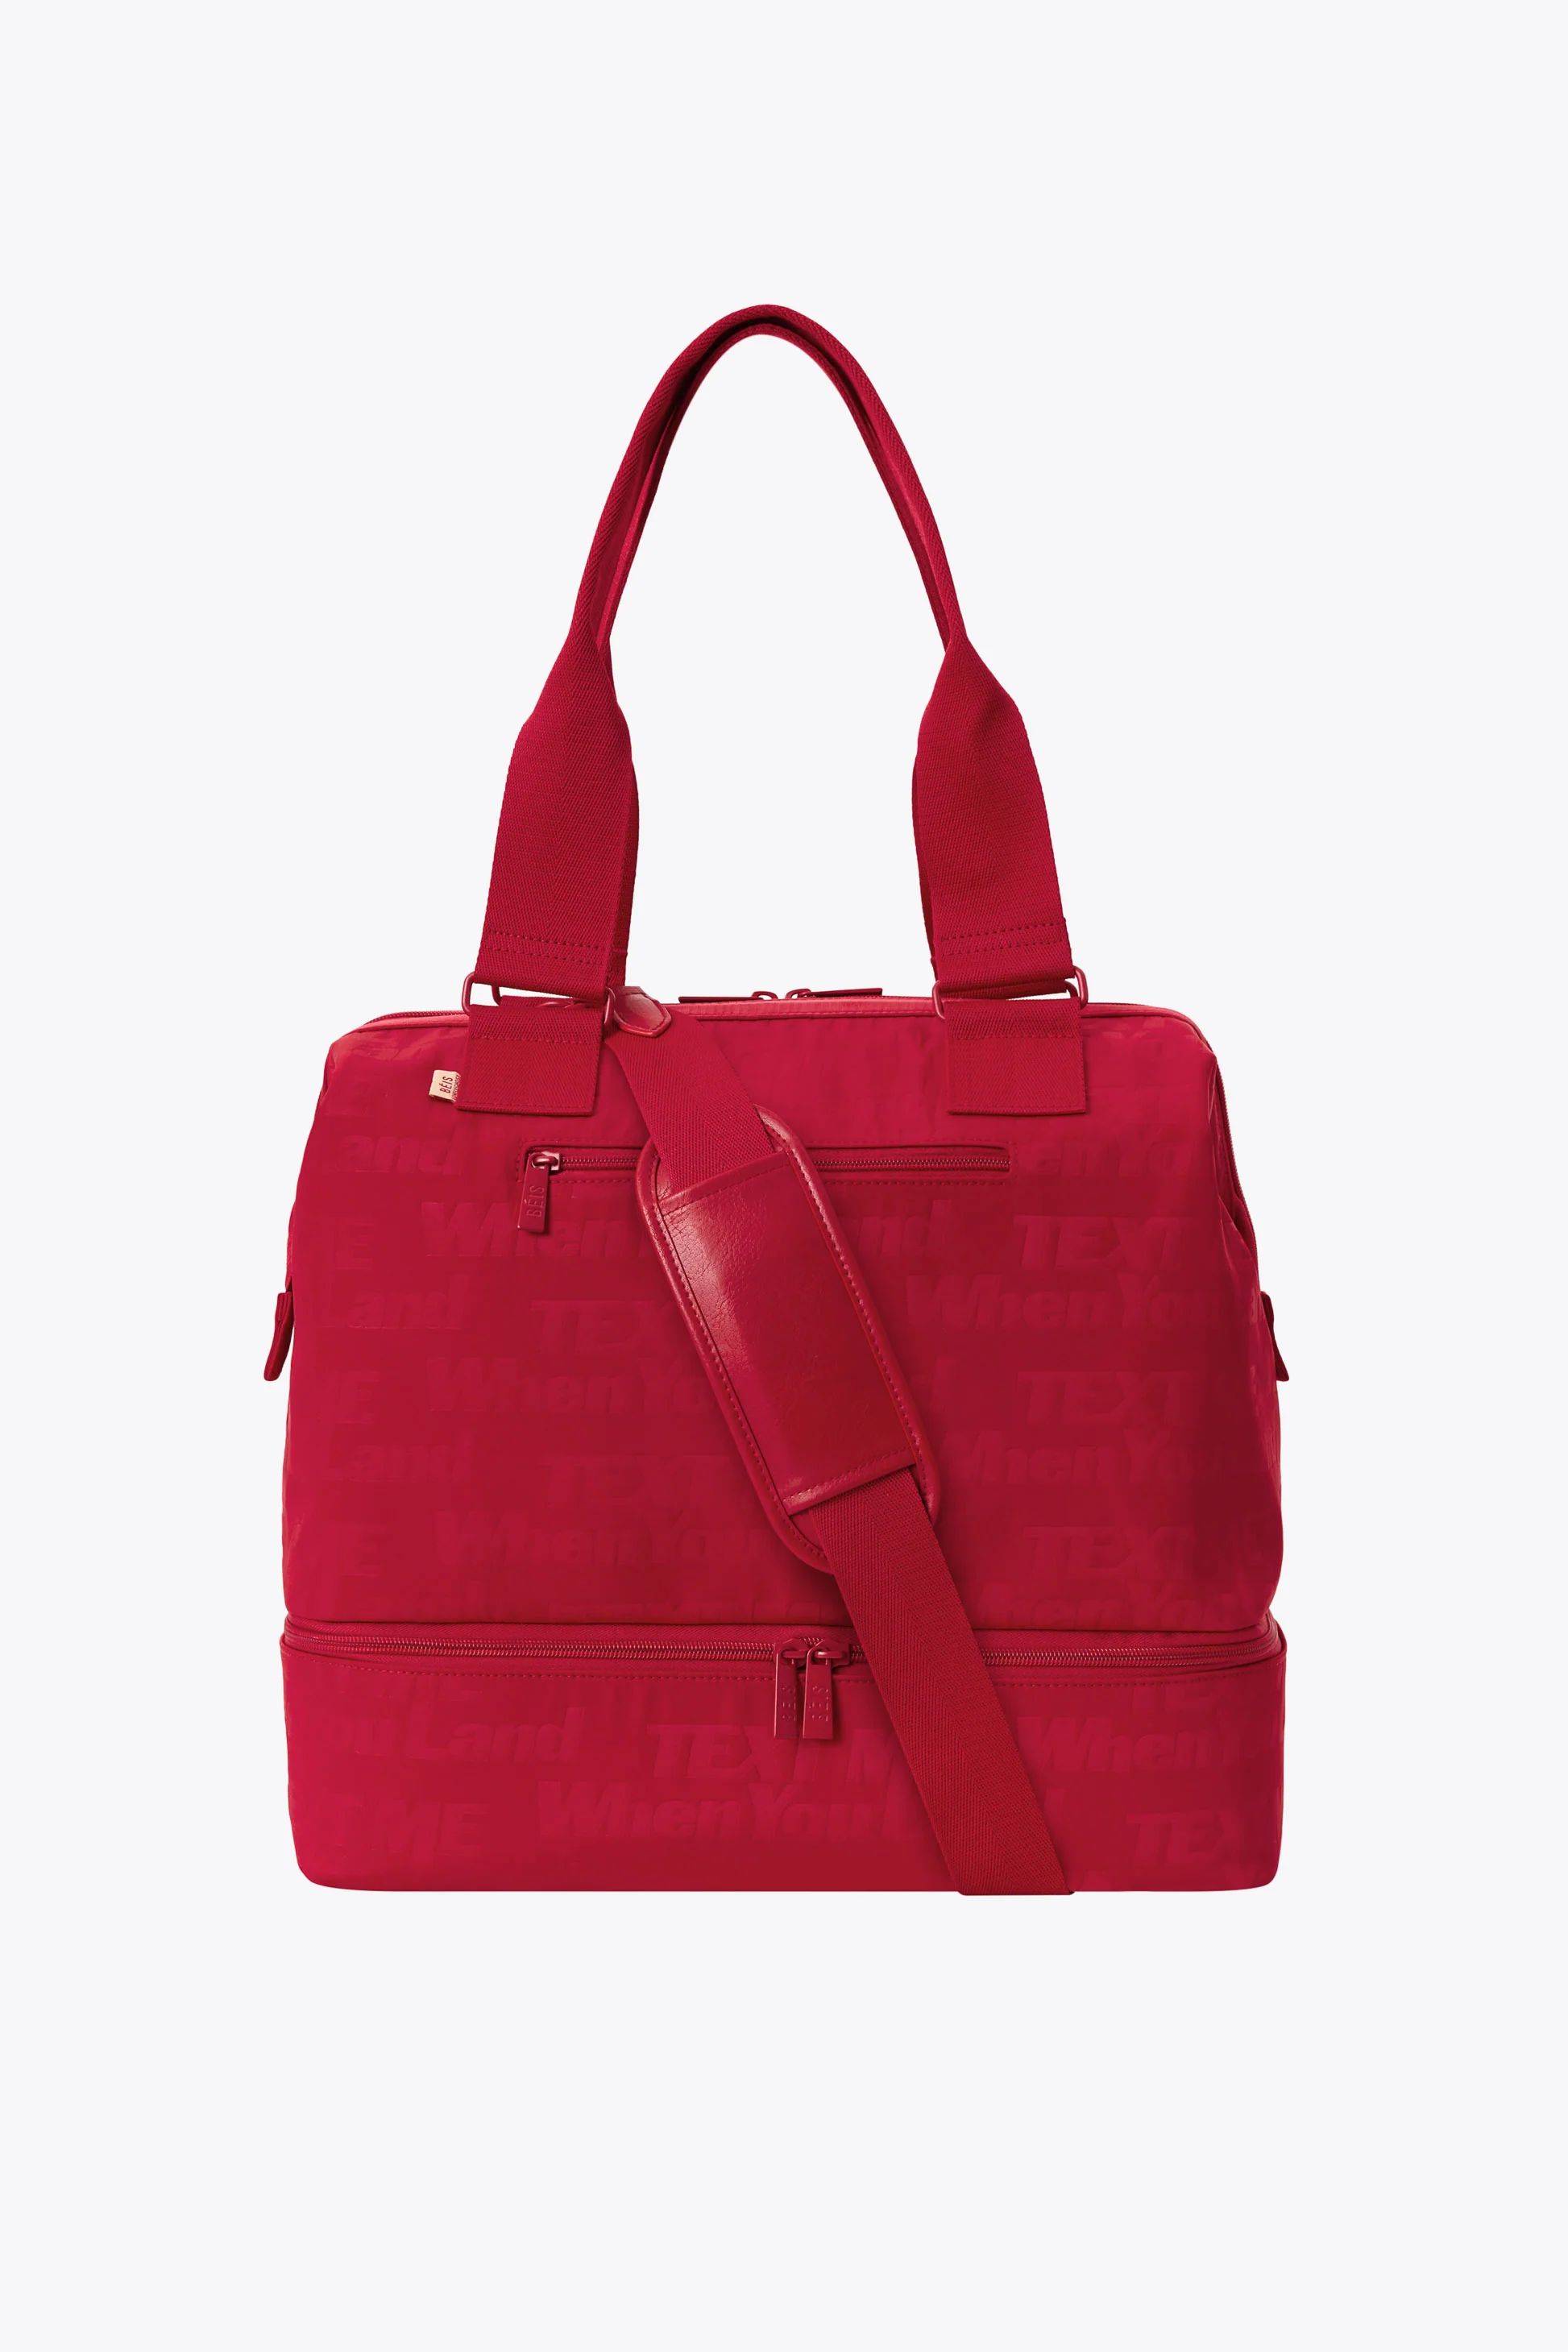 The Mini Weekender in Text Me Red | BÉIS Travel